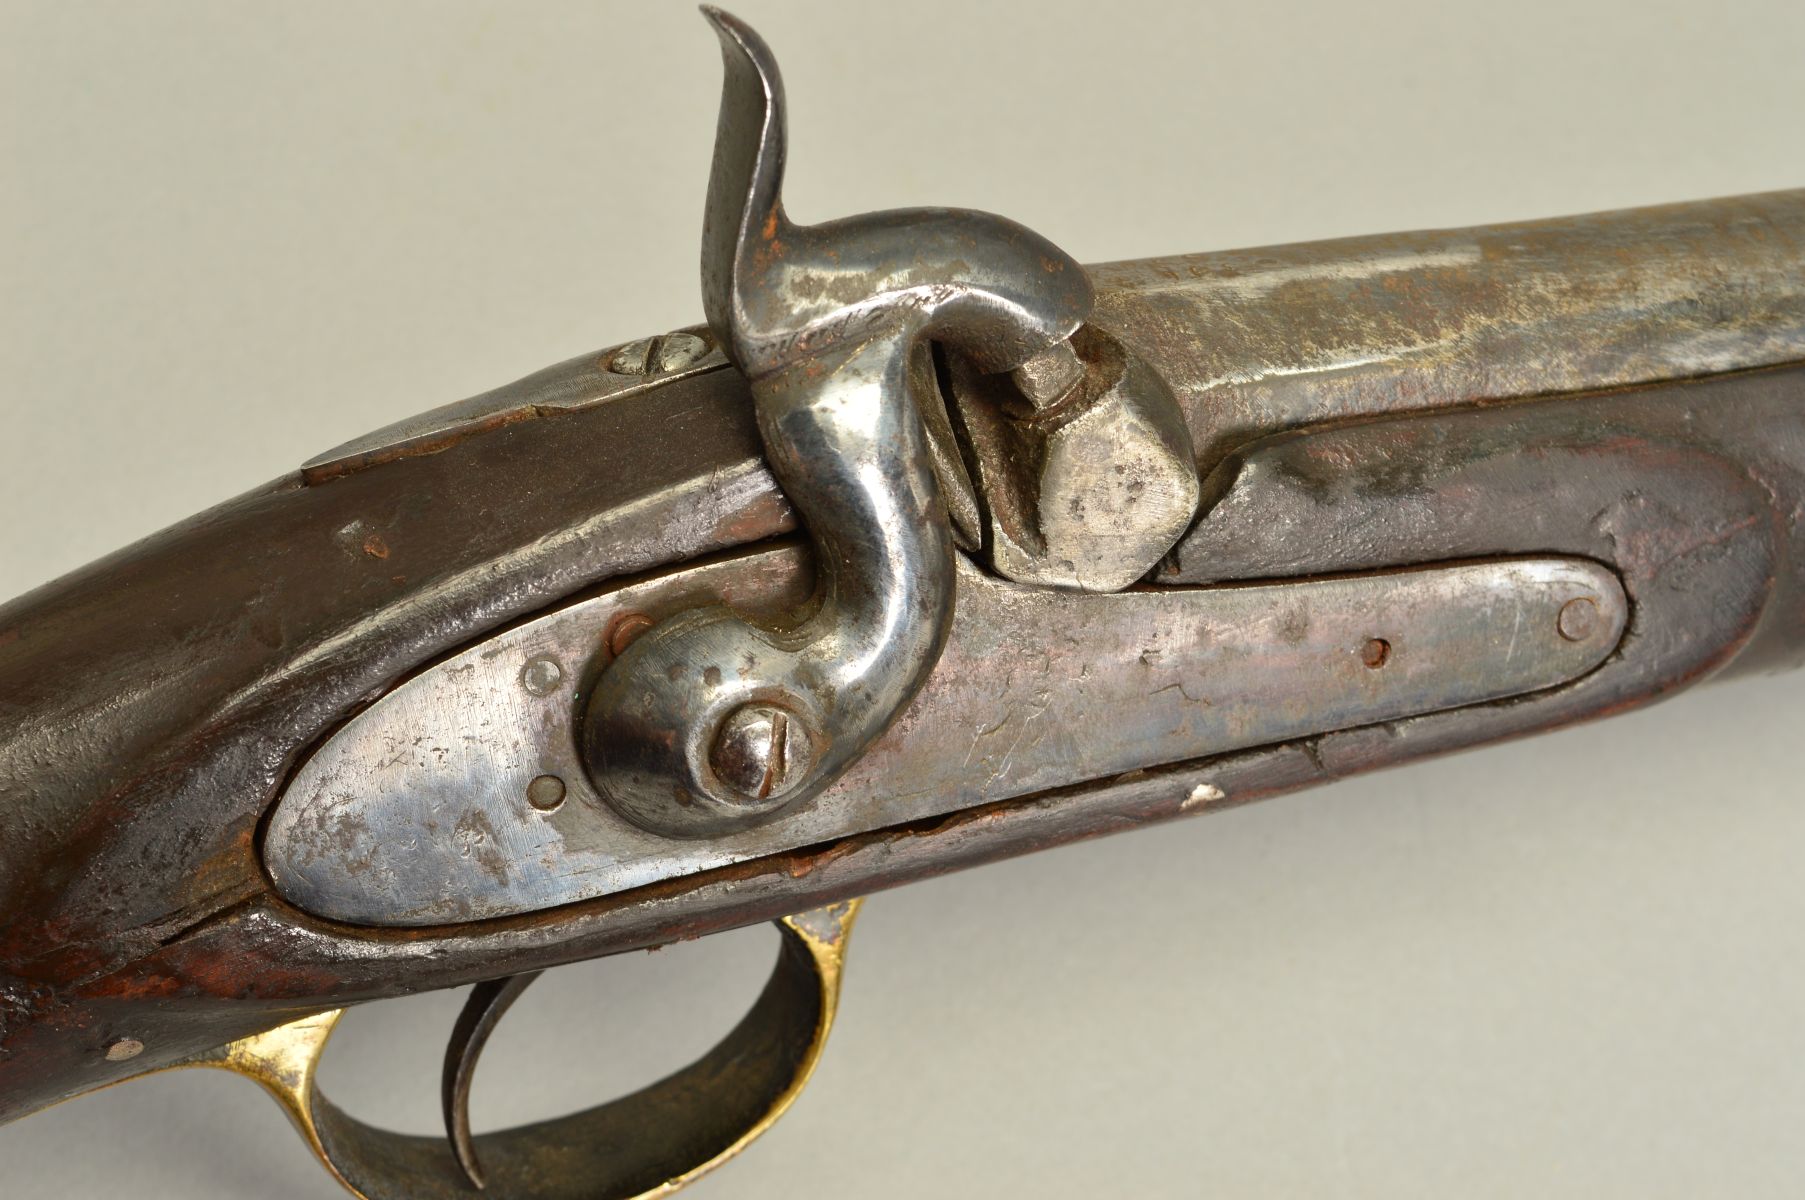 A 15 BORE 2 BAND PERCUSSION SINGLE BARREL MILITARY PATTERN MUSKET, the lock lacks the normal arsenal - Image 5 of 6